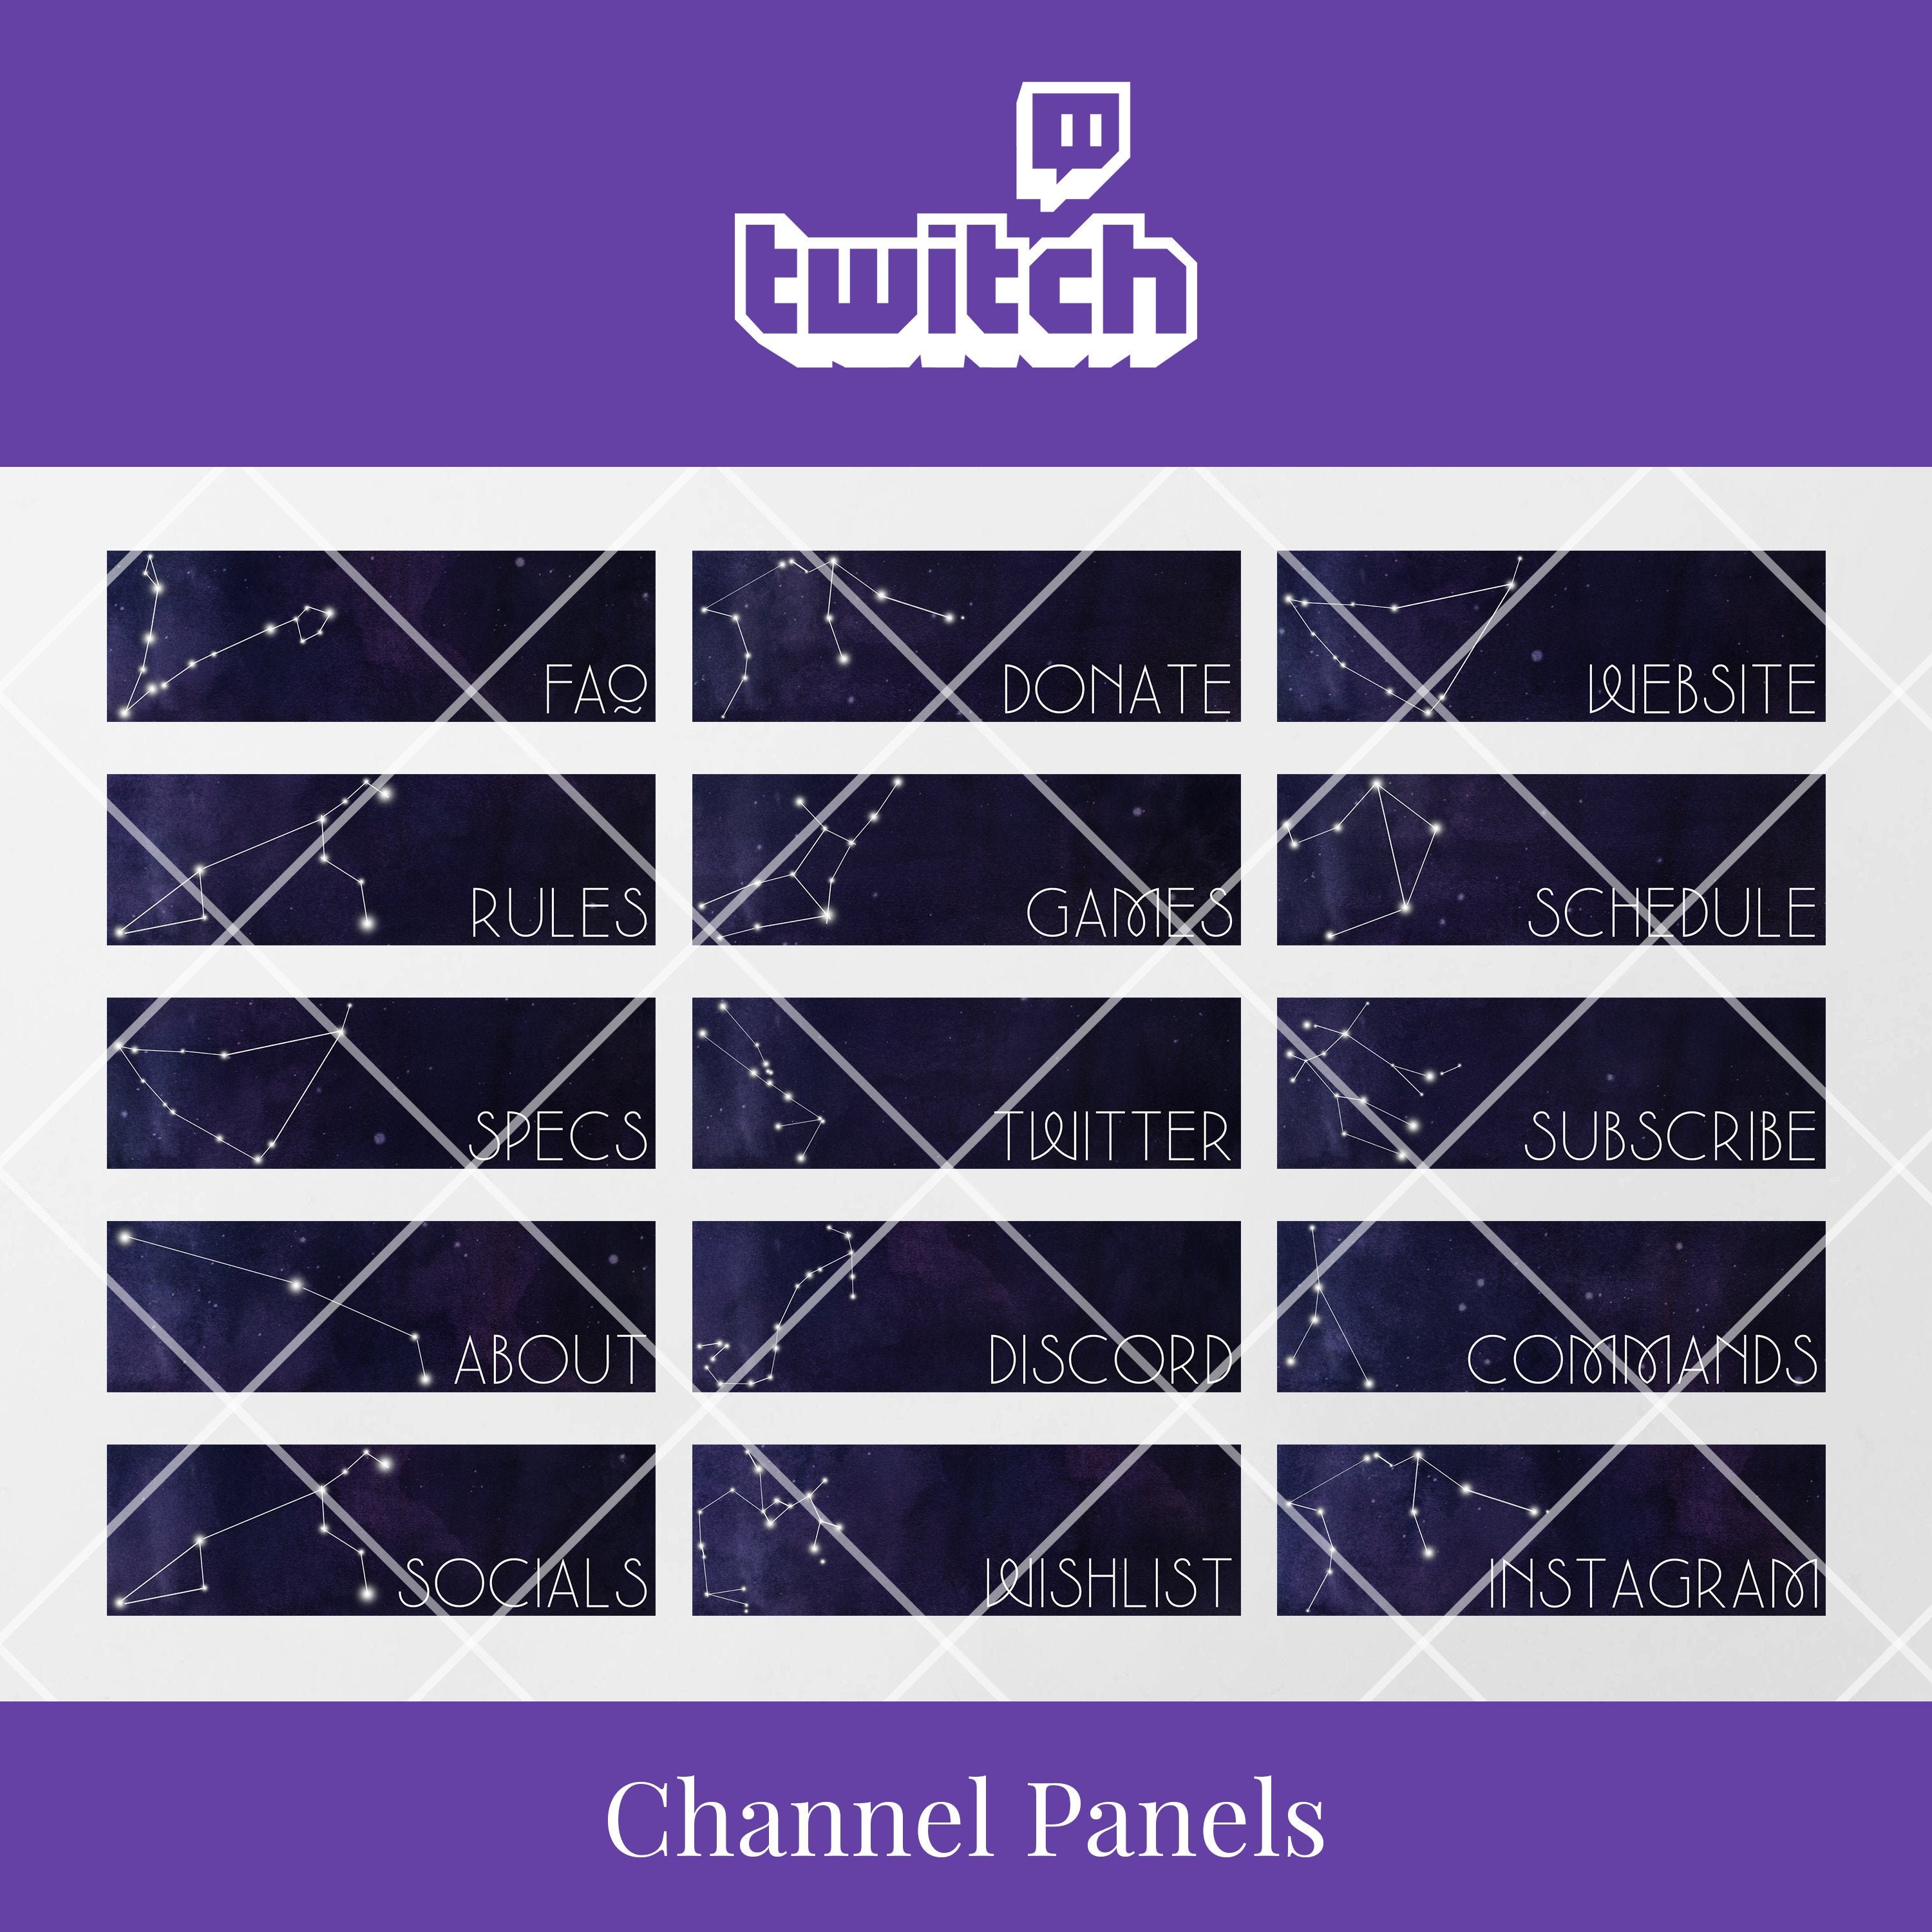 I made a FREE JUST CHATTING AQUARIUS overlay! Let me know what u